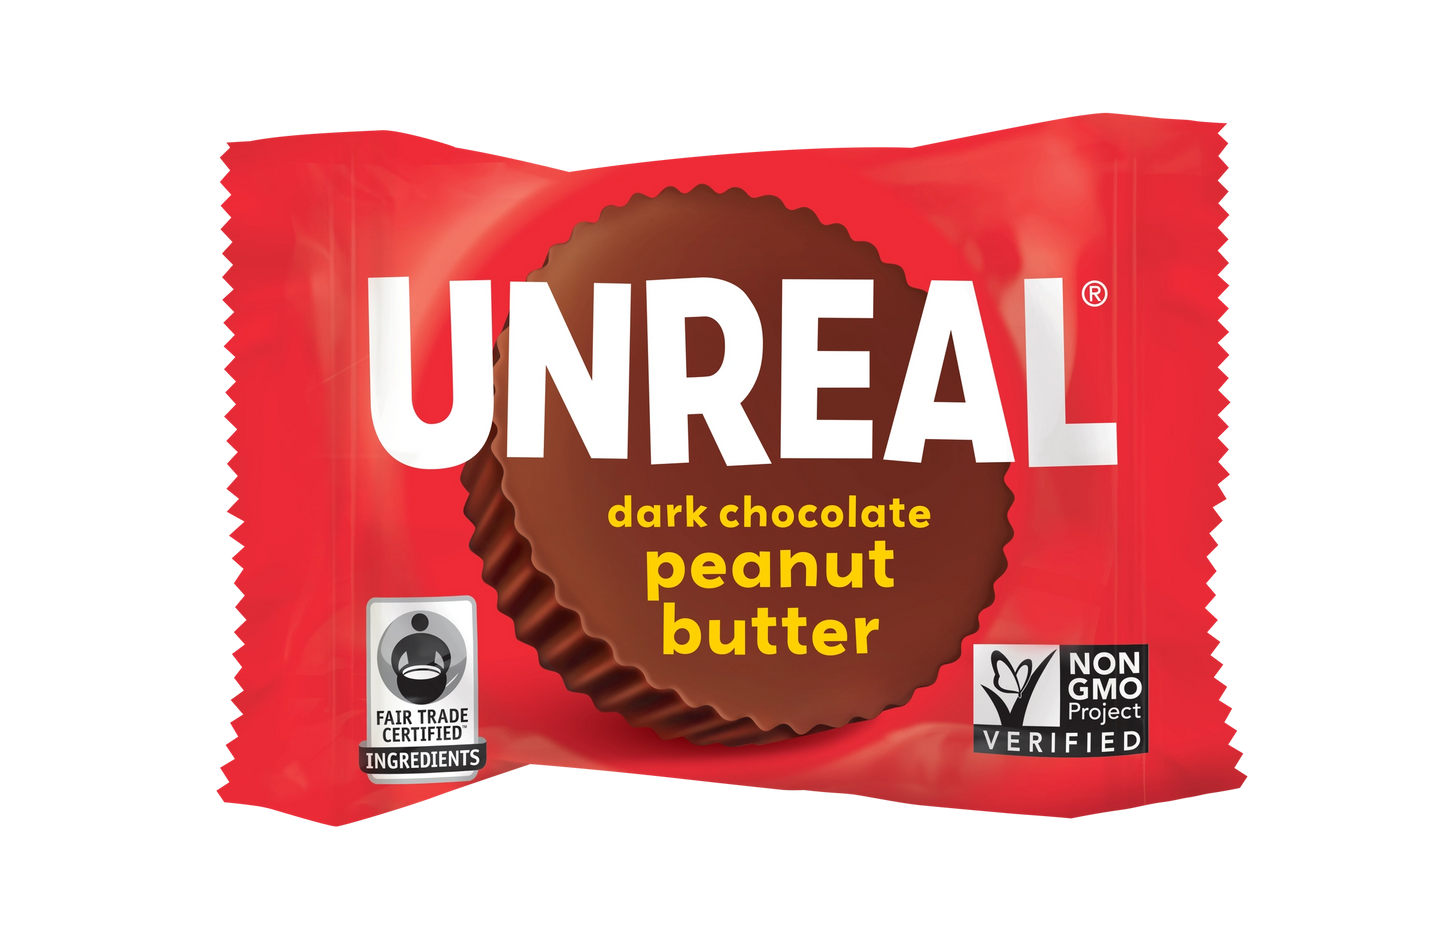 Dark Chocolate Peanut Butter Cups (Low Sugar, Organic Ingredients) - Snack Size by UNREAL